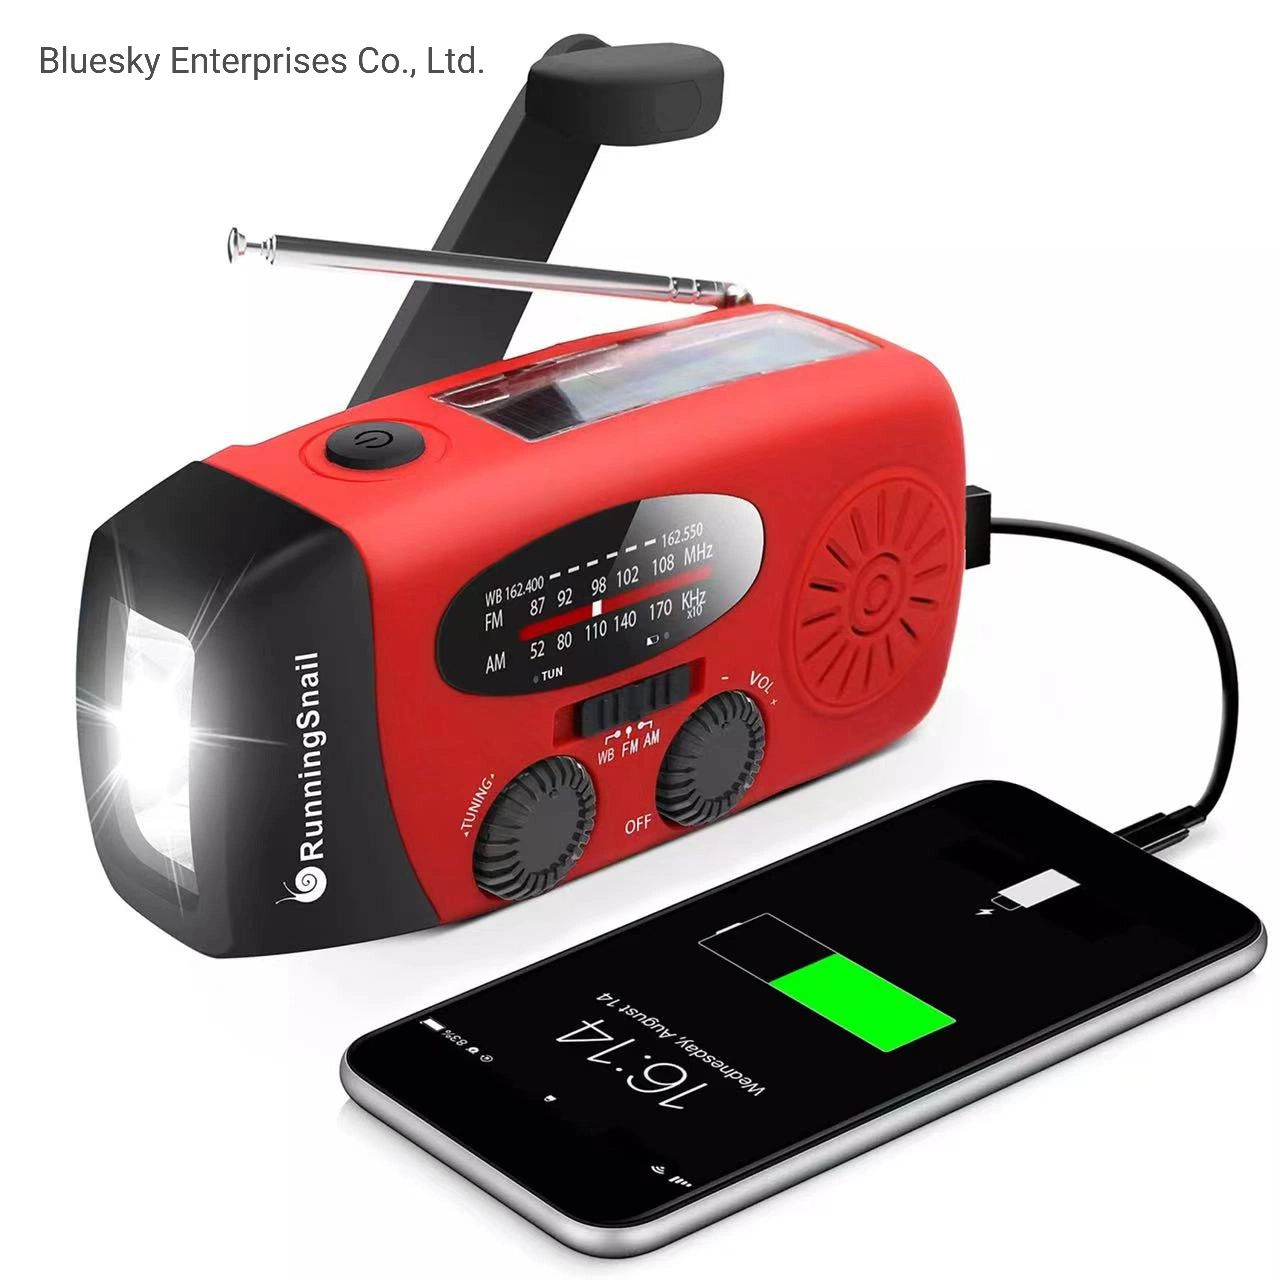 Tw028-1 Portable Rechargeable Emergency Solar Panel Hand Crank 2000mAh Wb / Noaa Radio with Phone Charger and LED Torch FM Radio